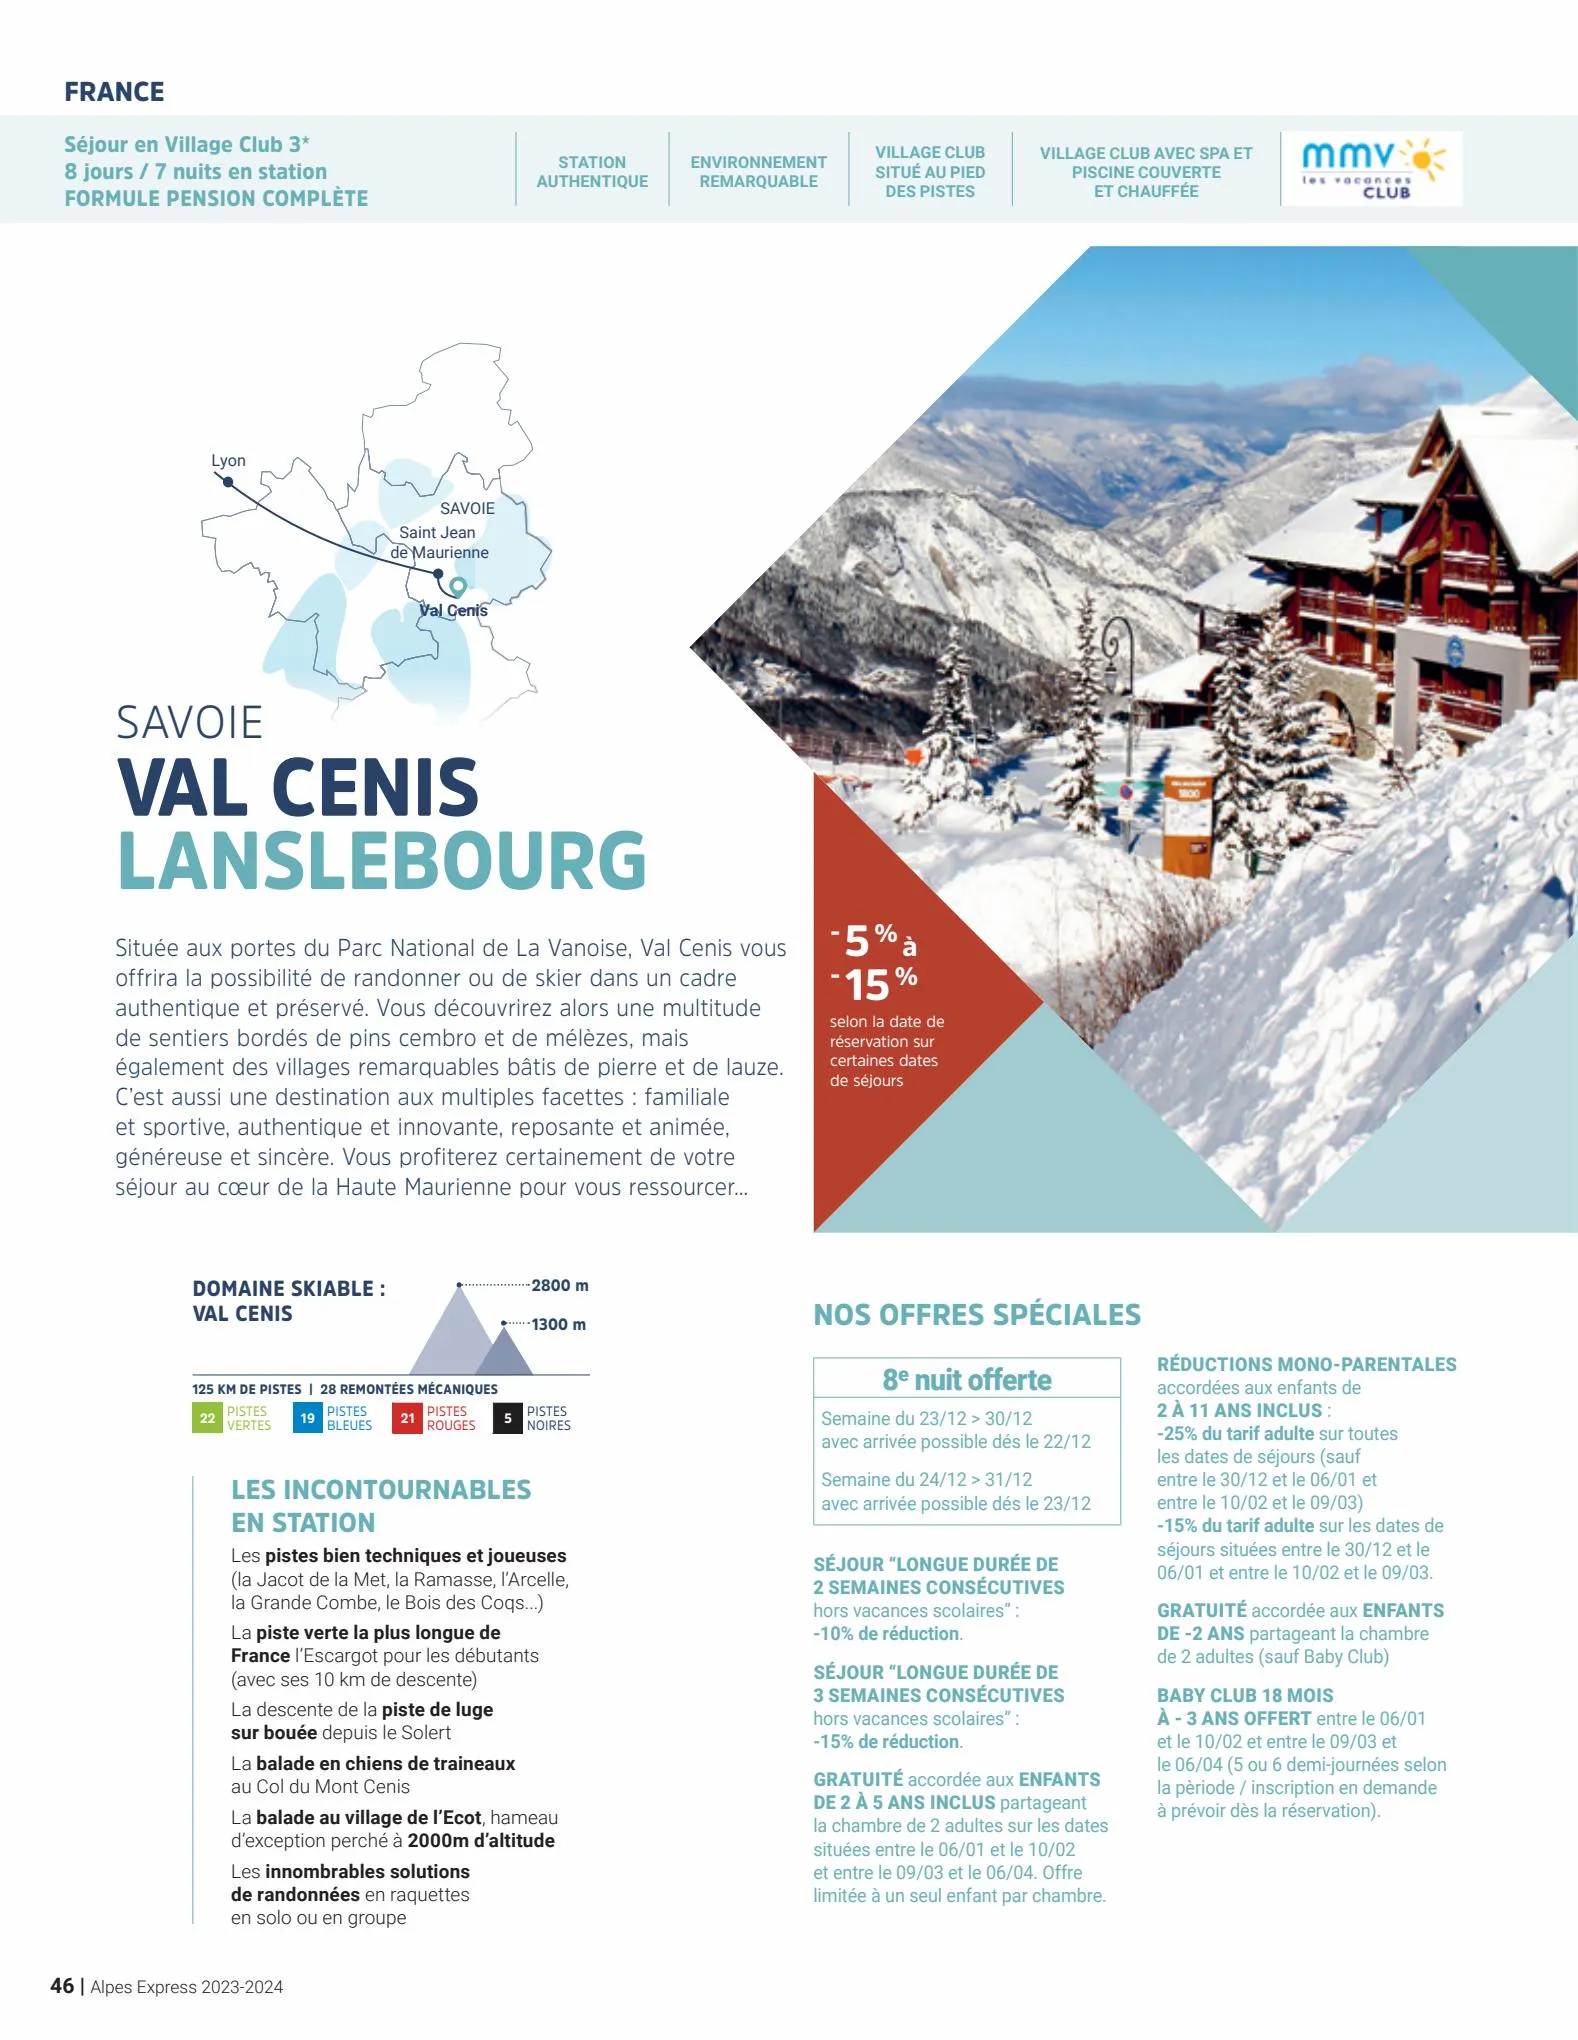 Catalogue Alpes Express - Hiver 2023 - 2024, page 00046